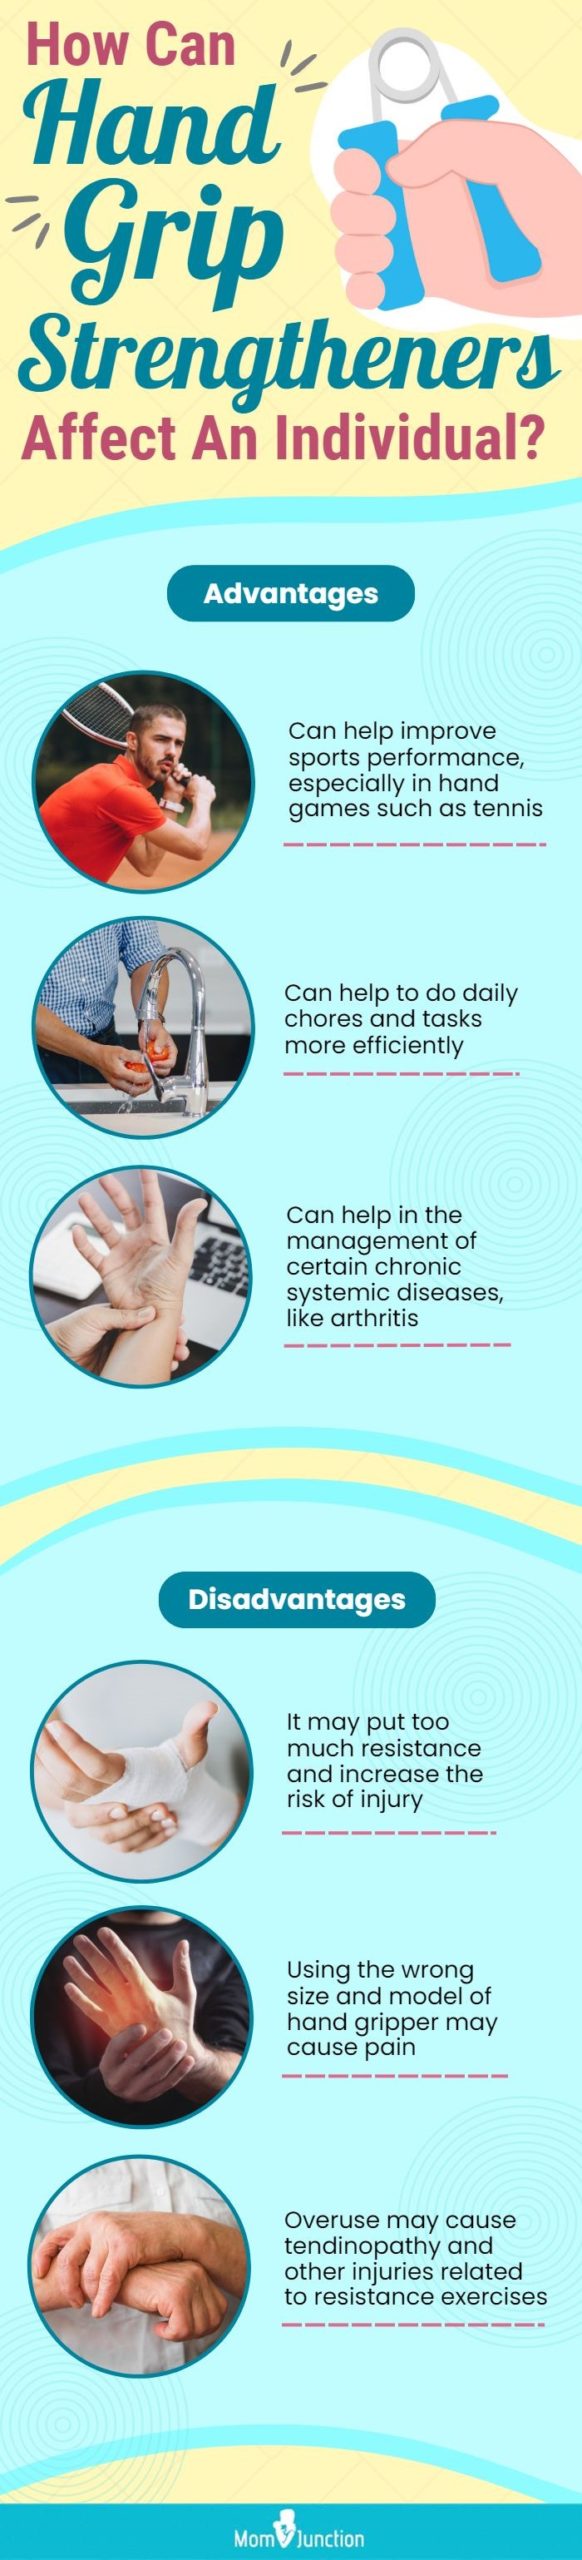 How Can Hand Grip Strengtheners Affect An Individual (infographic)